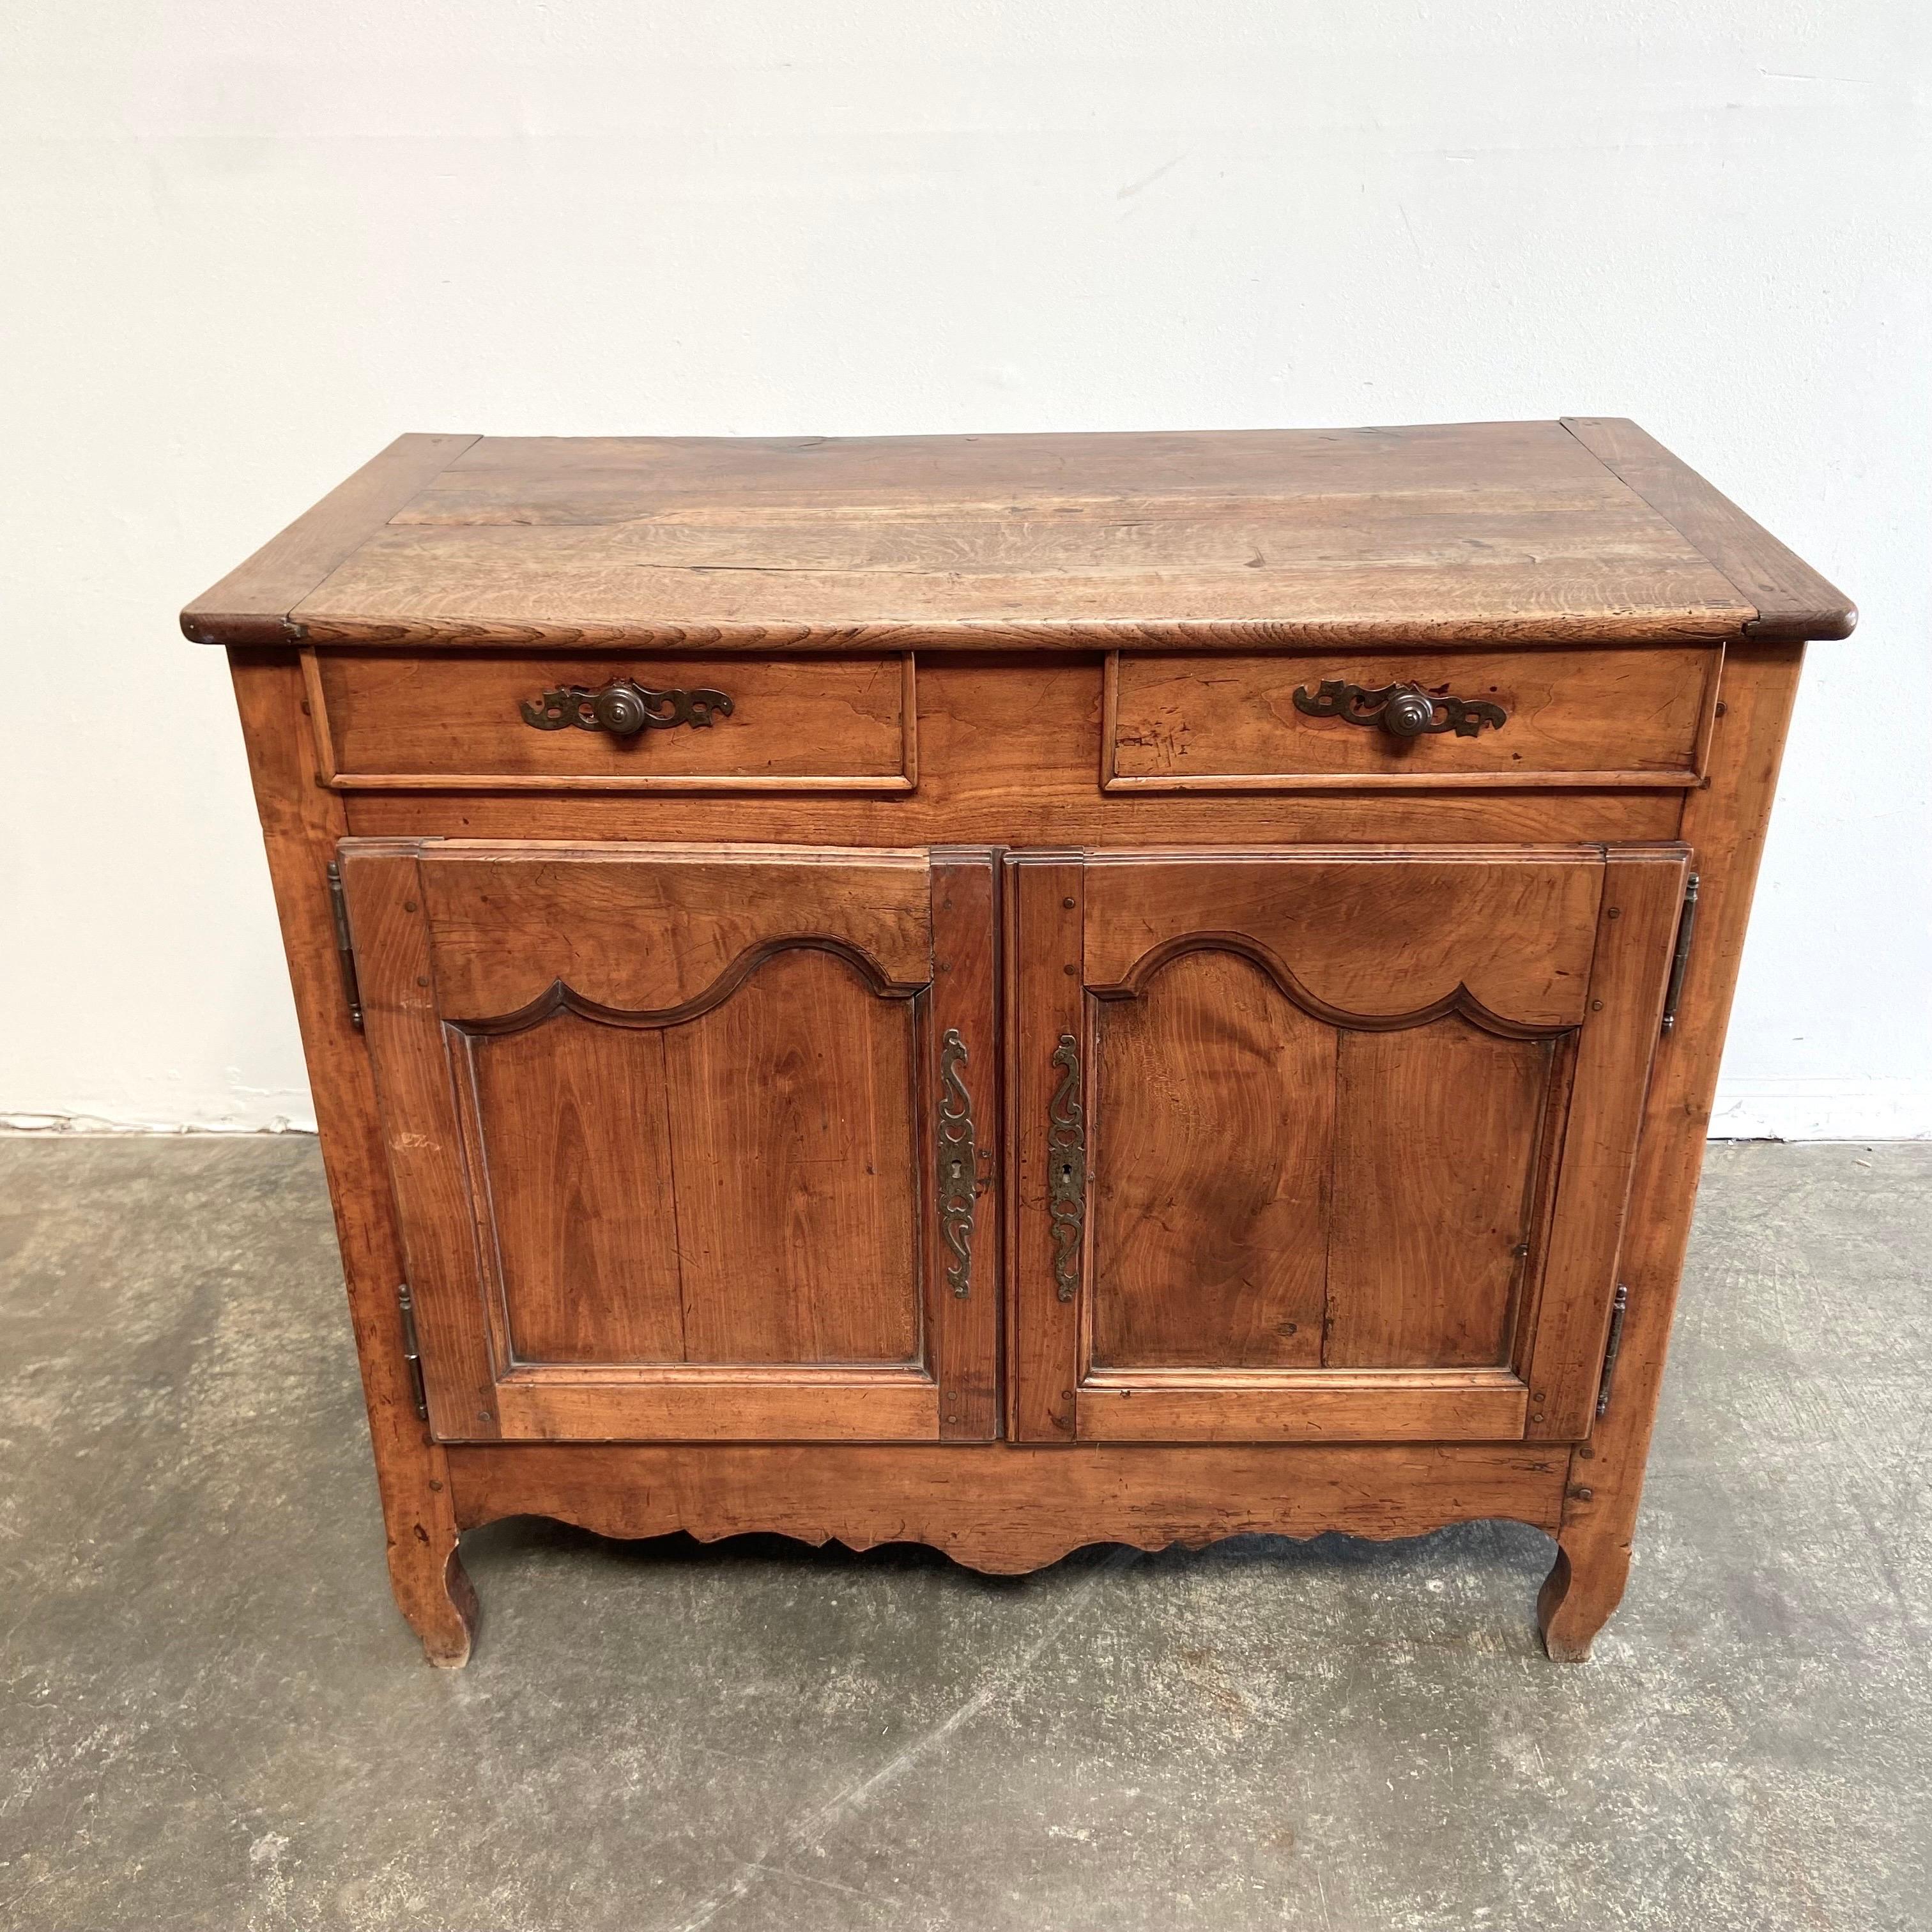 French walnut cabinet 44”w x 22”d x 29”h
A French Transition style walnut buffet from the early 19th century, with two drawers over two doors, carved stars and scalloped apron. Created in France during the early years of the 19th century, this